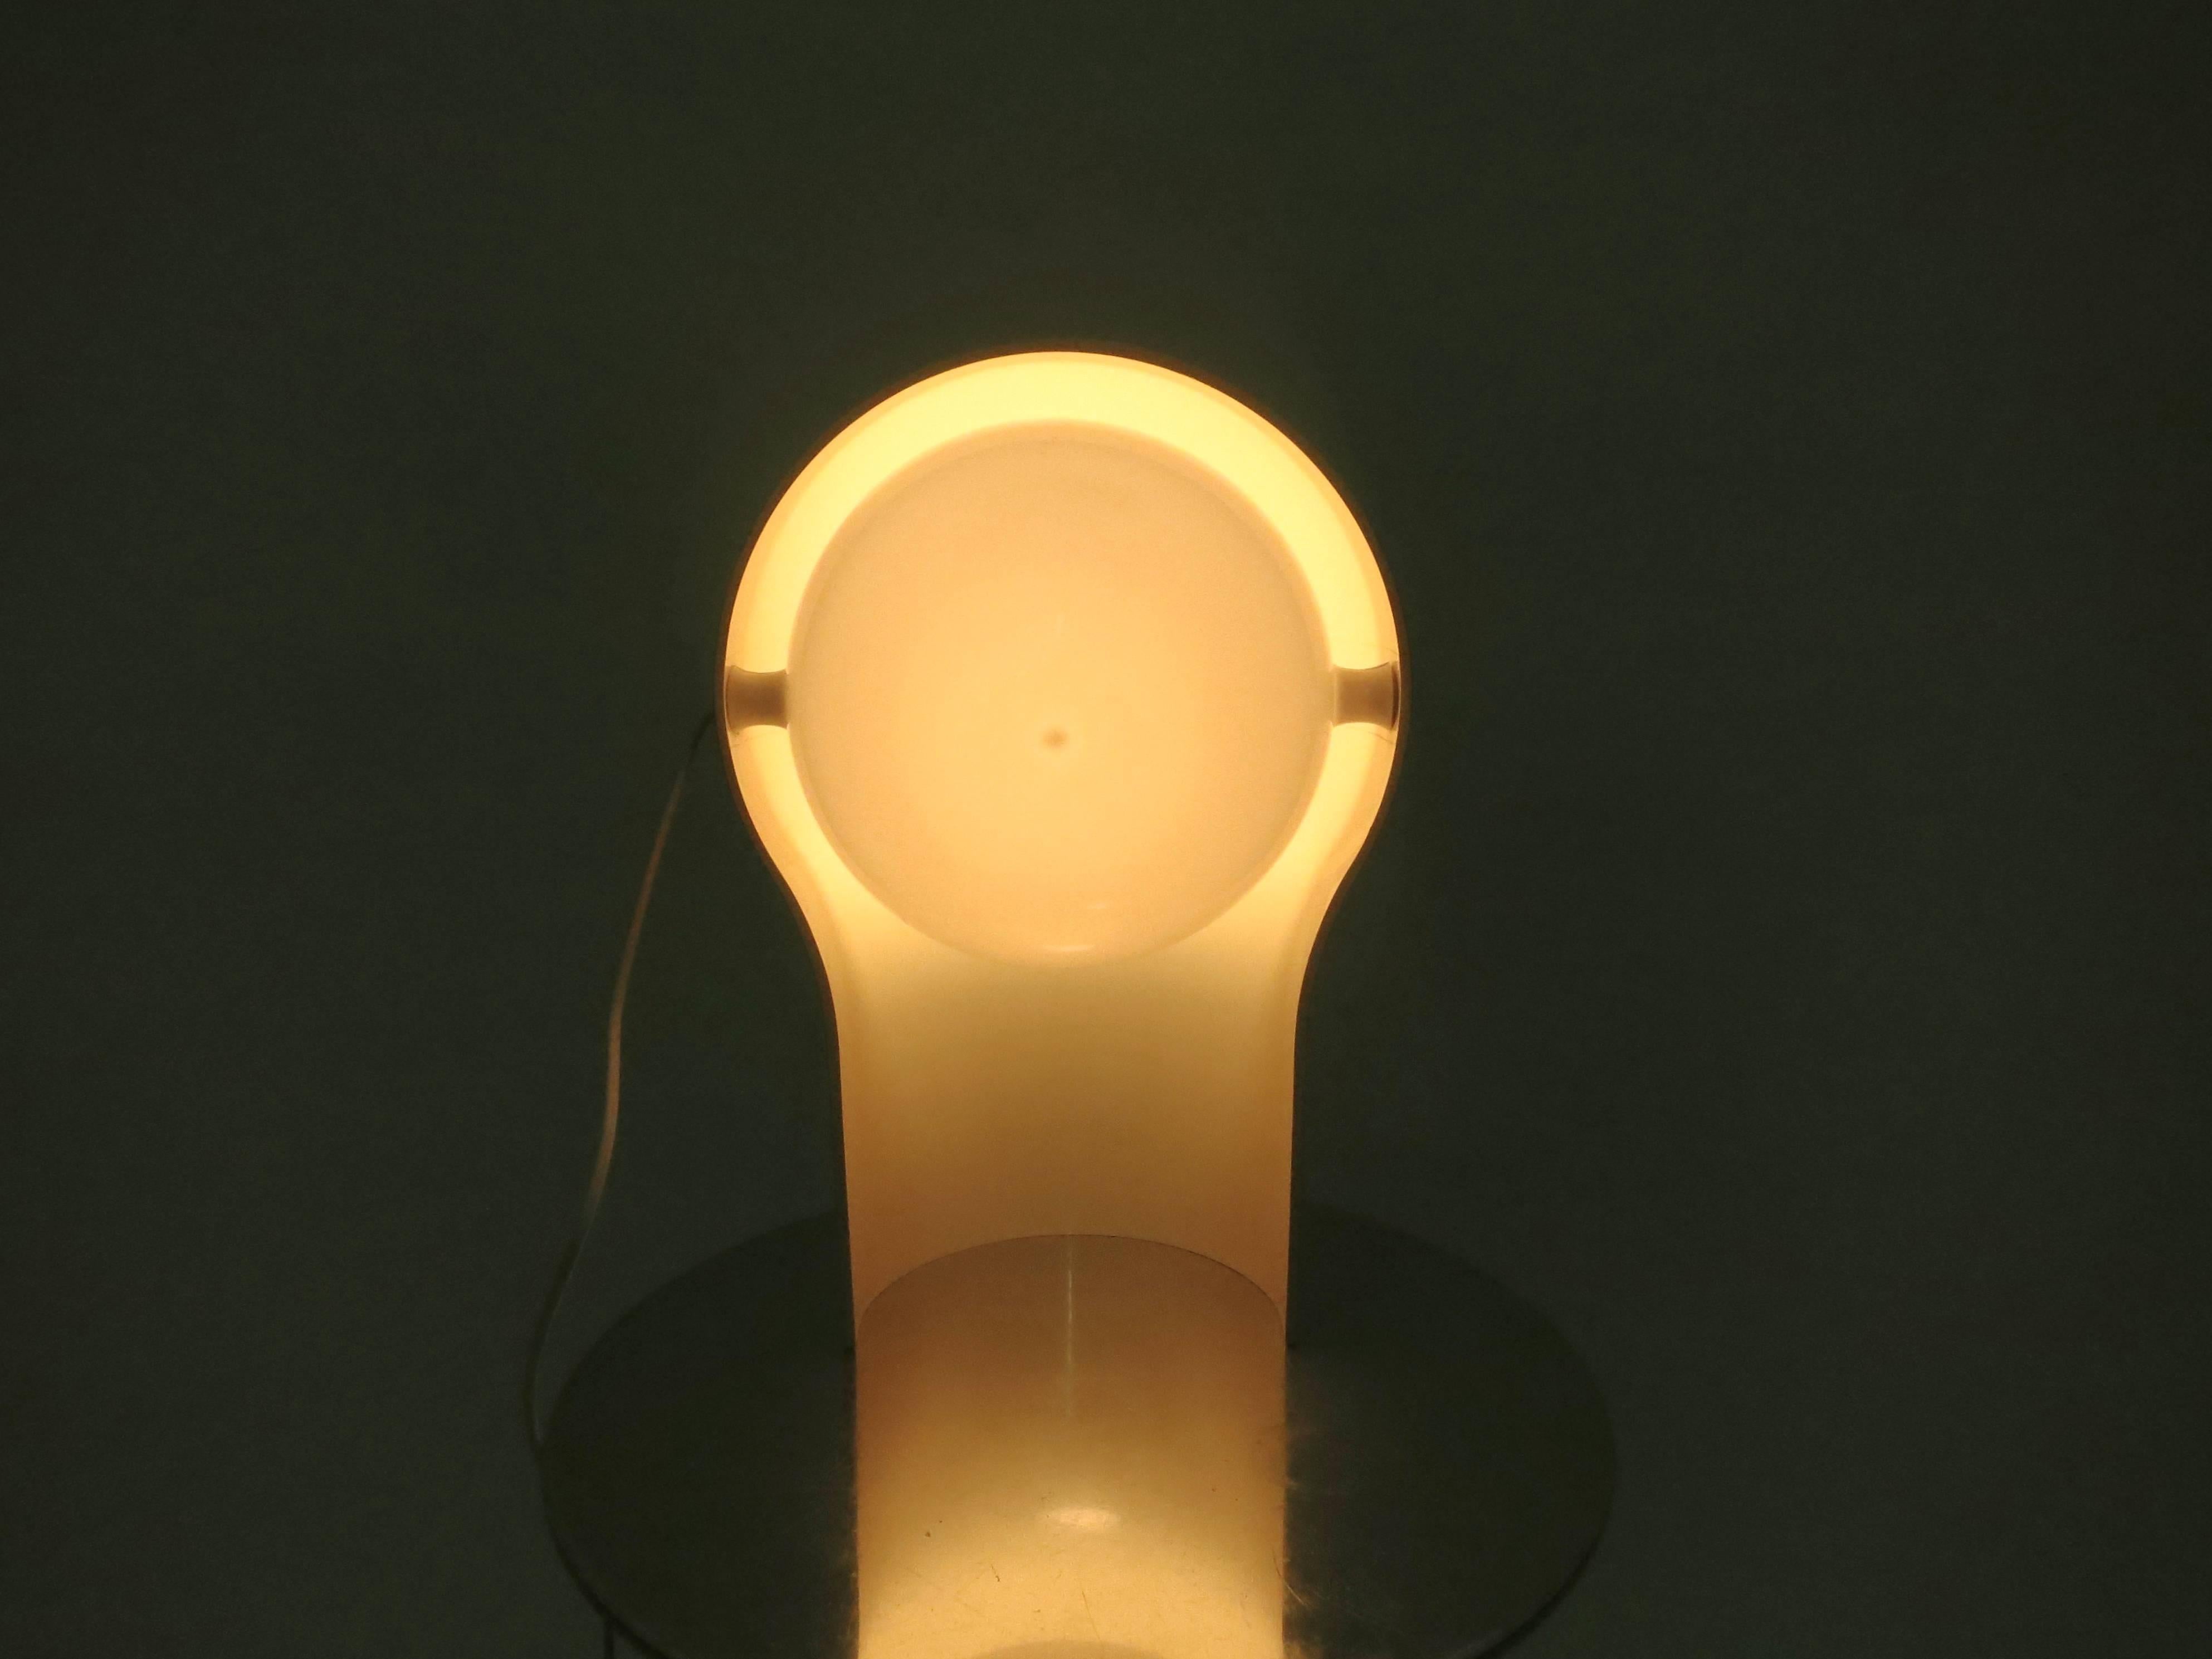 Plastic Pair of Vintage Telegono Lamps by Vico Magistretti for Artemide, Italy, 1968